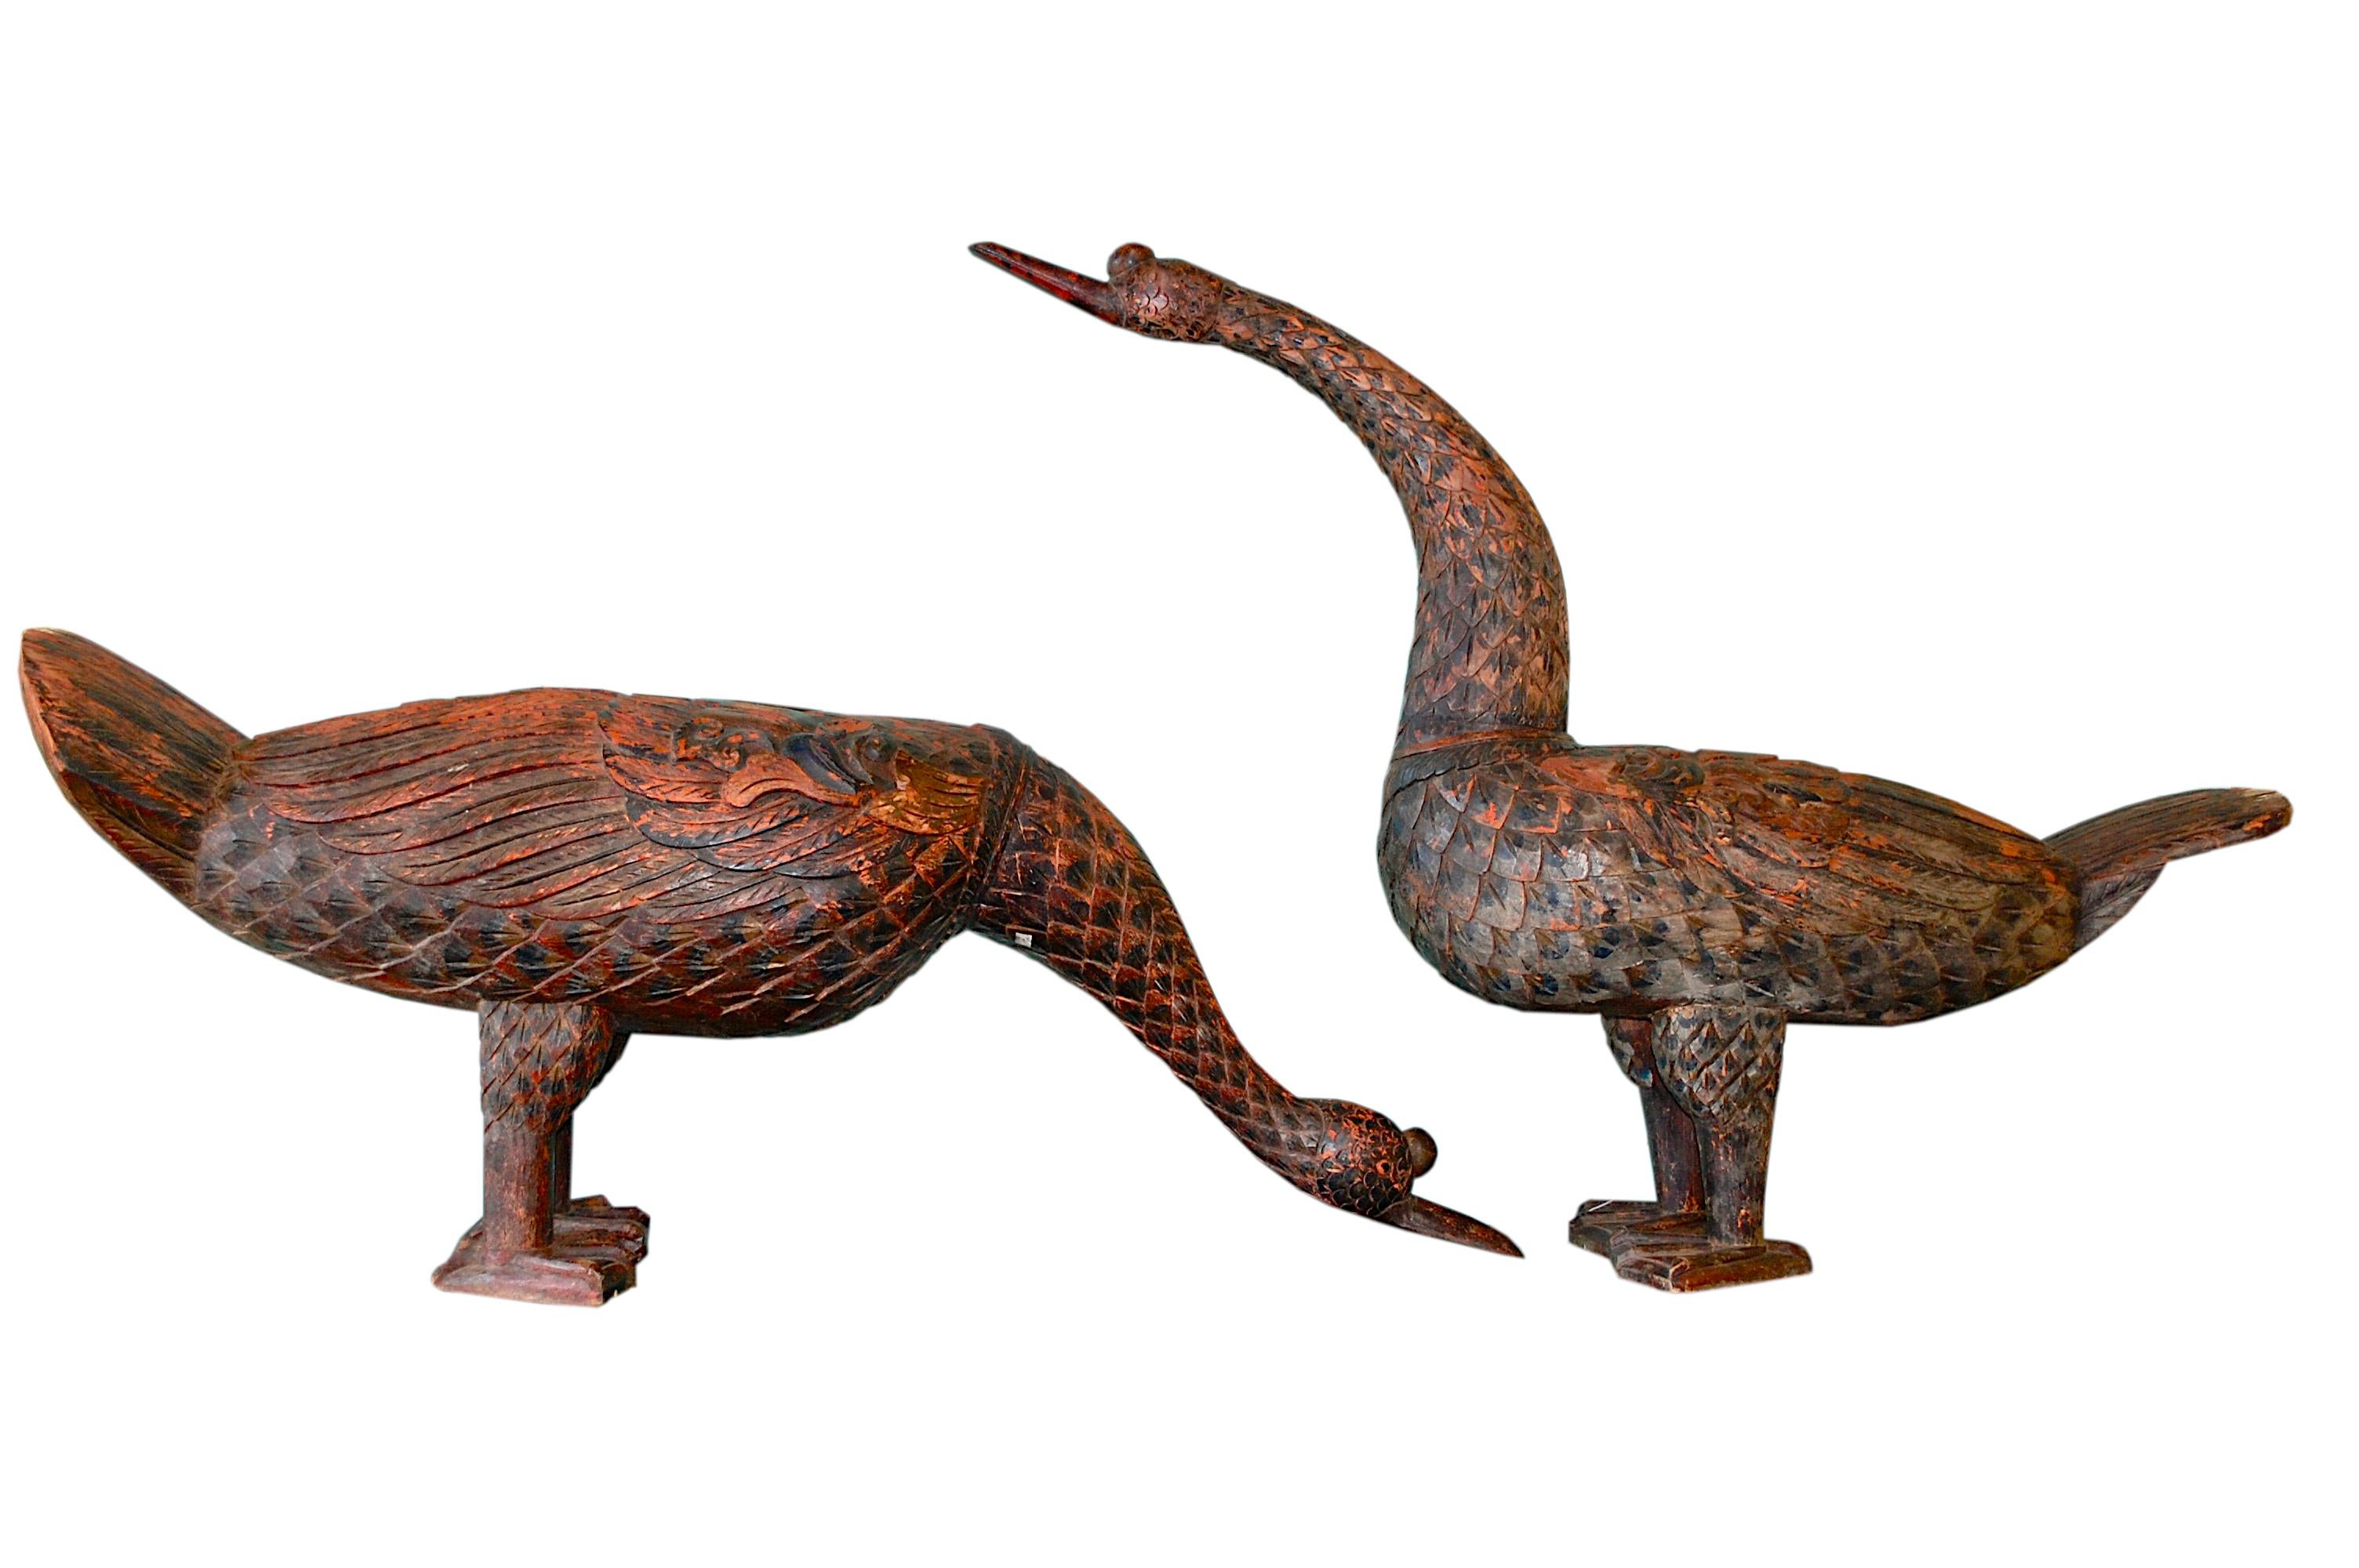 Pair of large Chinese wood geese.
Rare early 20th Century hand carved exotic wood and polychrome, heavy geese sculptures with beautiful earthy colors. Some small natural old wood cracks and paint loss as shown on photos, overall very good condition.